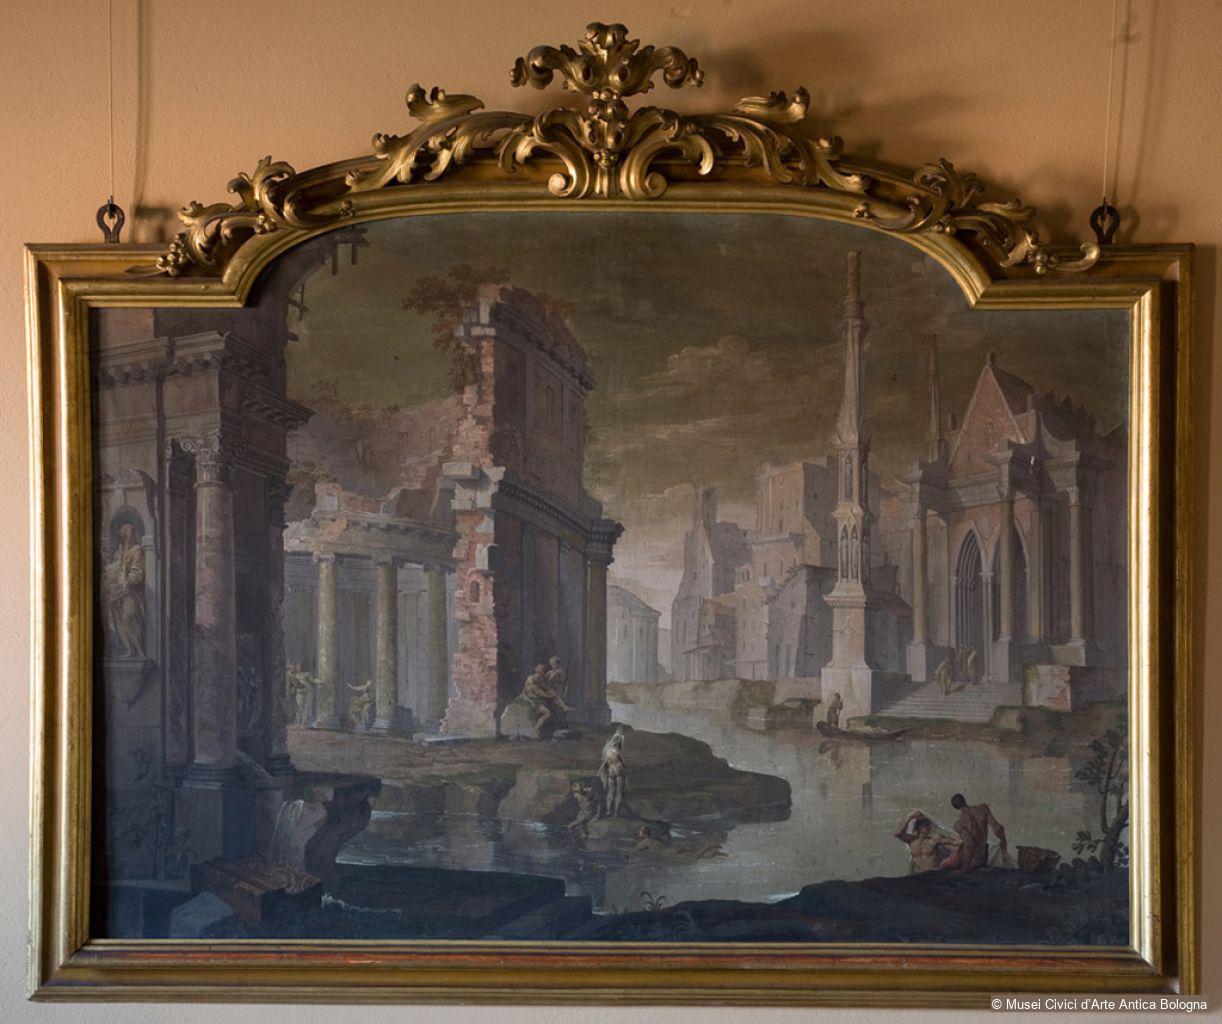 Views with ruins - Discover Baroque Art - Virtual Museum